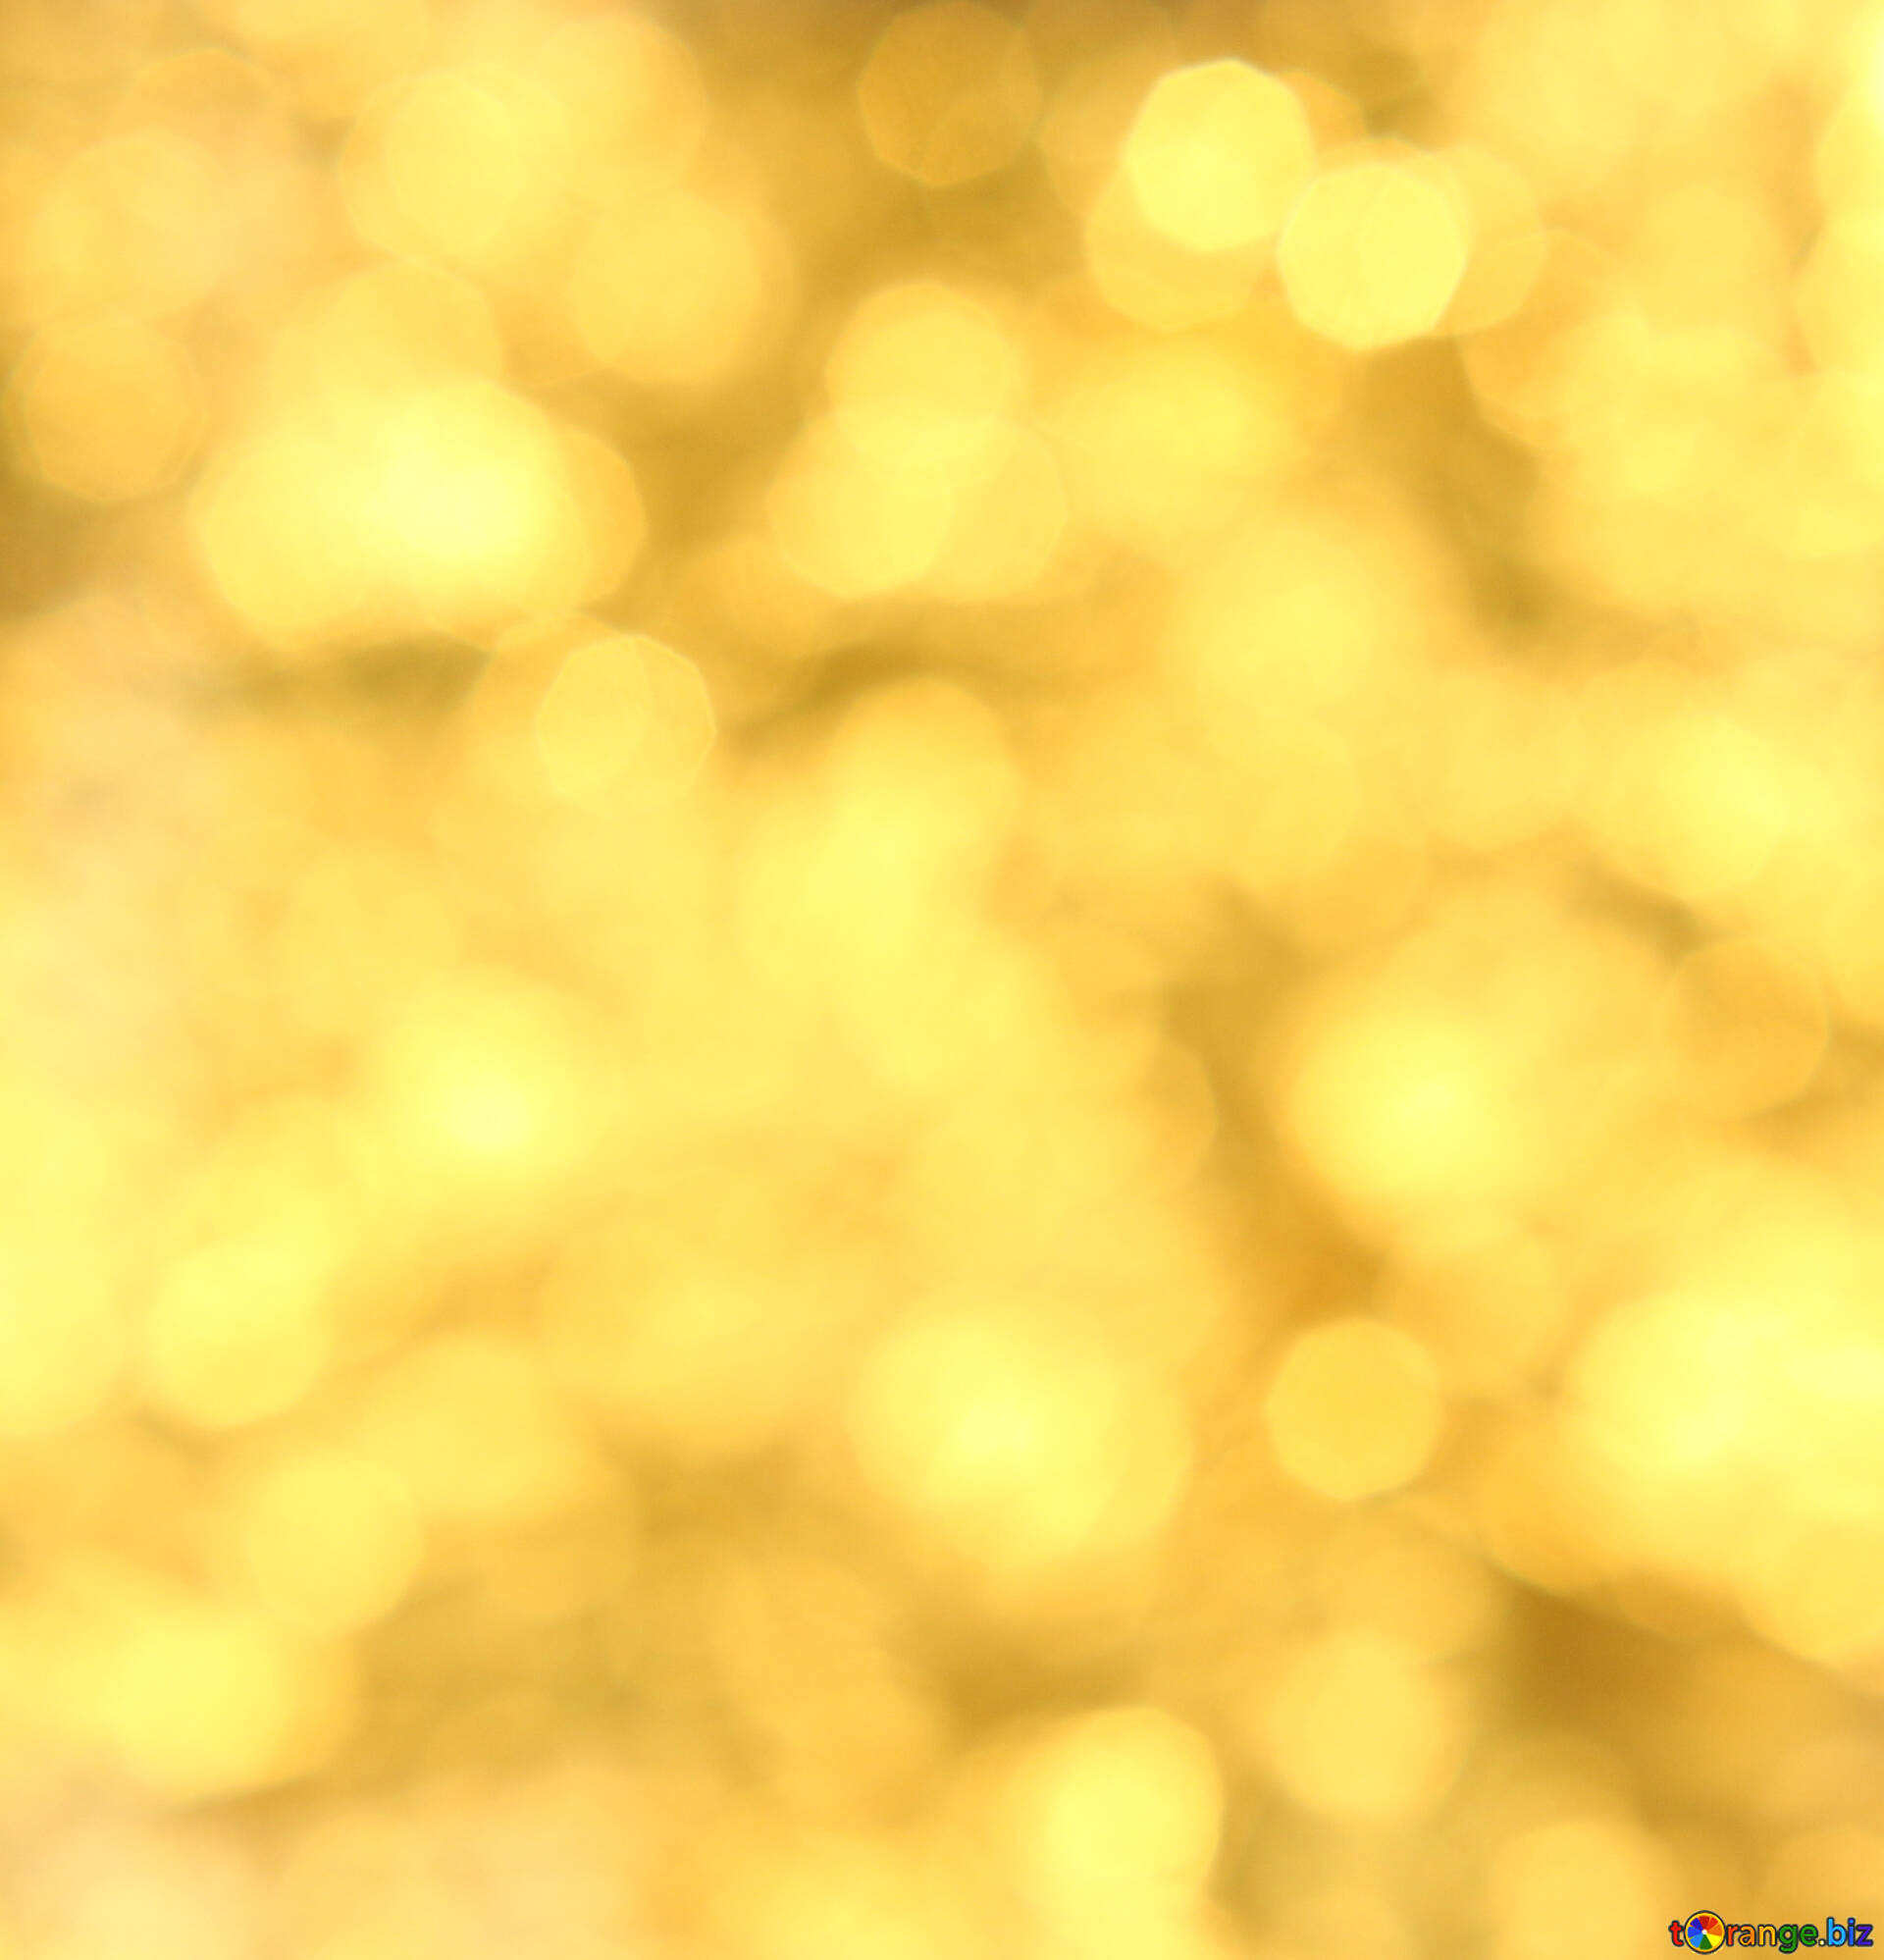 Gold backgrounds image shiny background images gold № 37819  ~  free pics on cc-by license